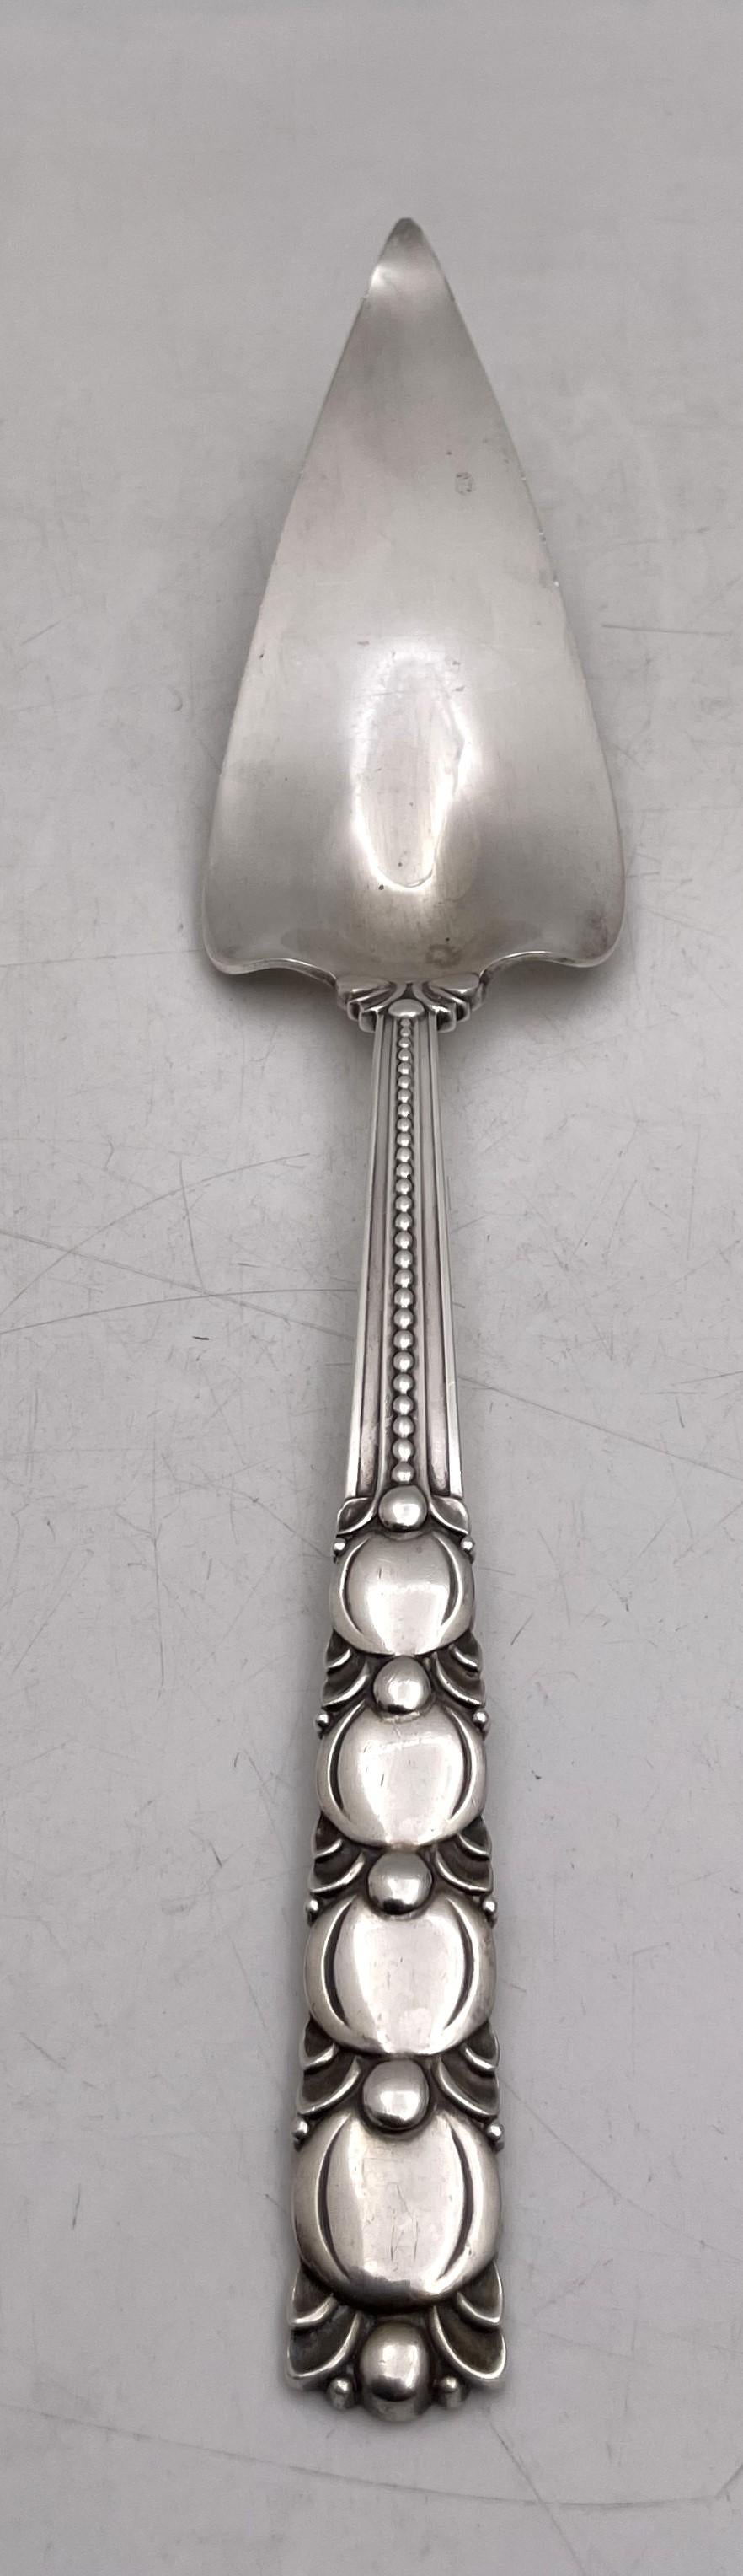 Tiffany & Co. sterling silver pie or cake server in the Tomato pattern and in Art Deco style with an elegant, geometric style, measuring 12'' in length, and bearing hallmarks as shown. The motif traditionally known as Tomato or Pumpkin Vine was